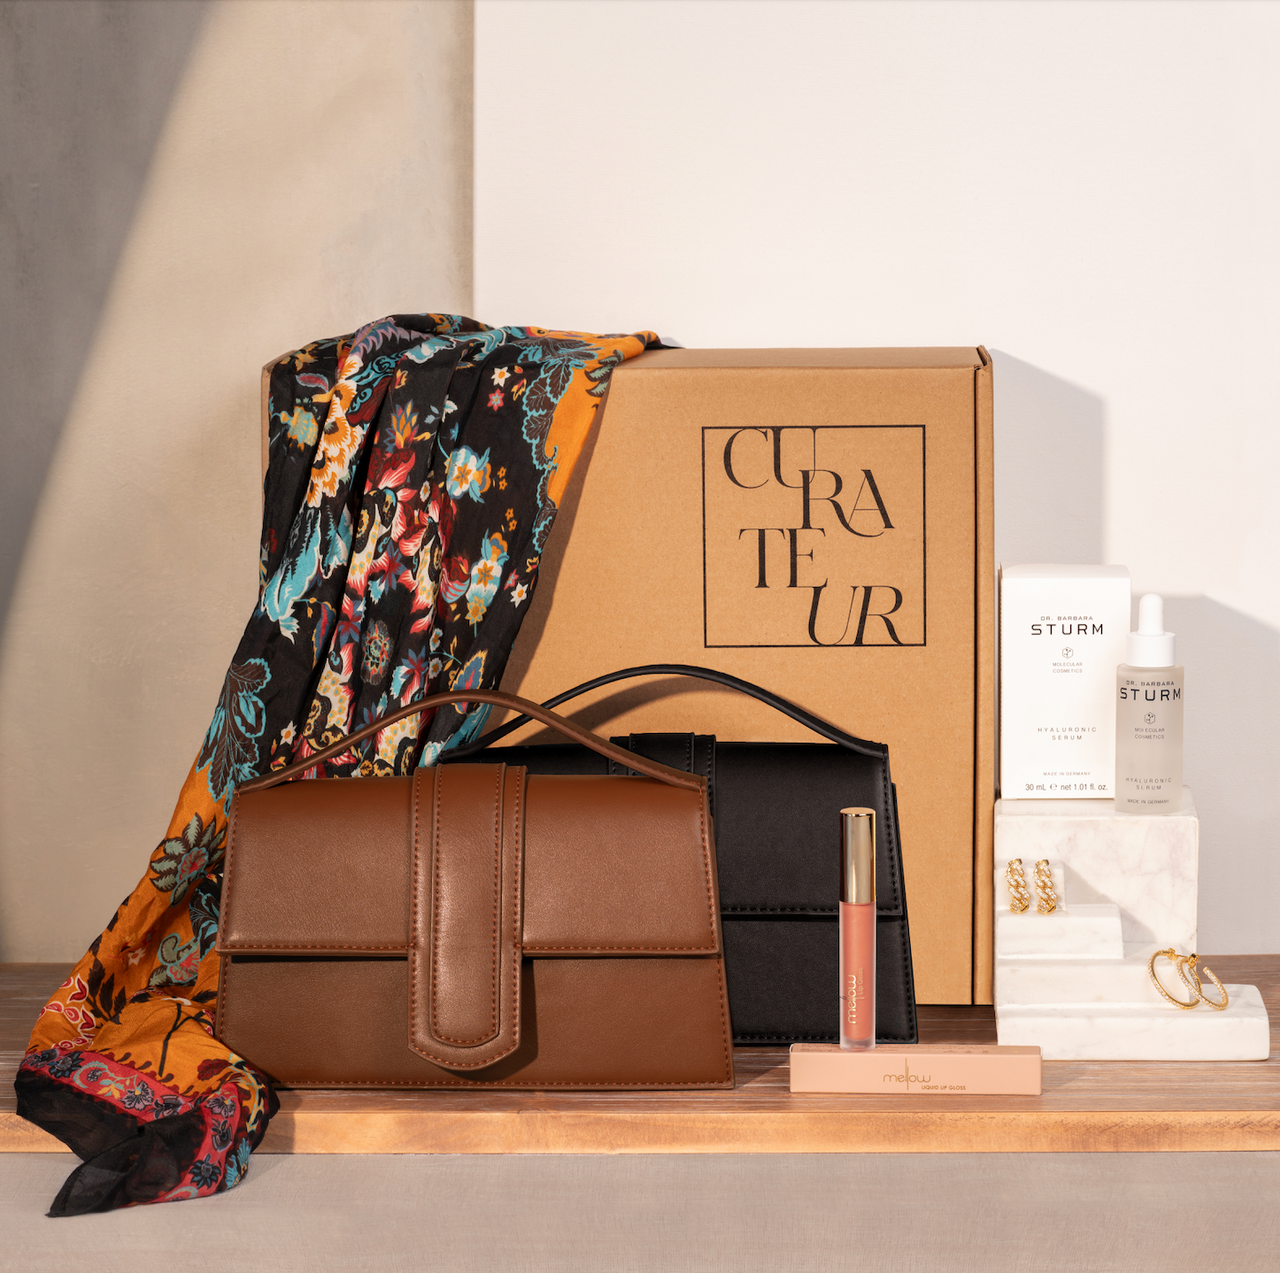 Rachel Zoe Summer Curateur Box Chic At Every Age